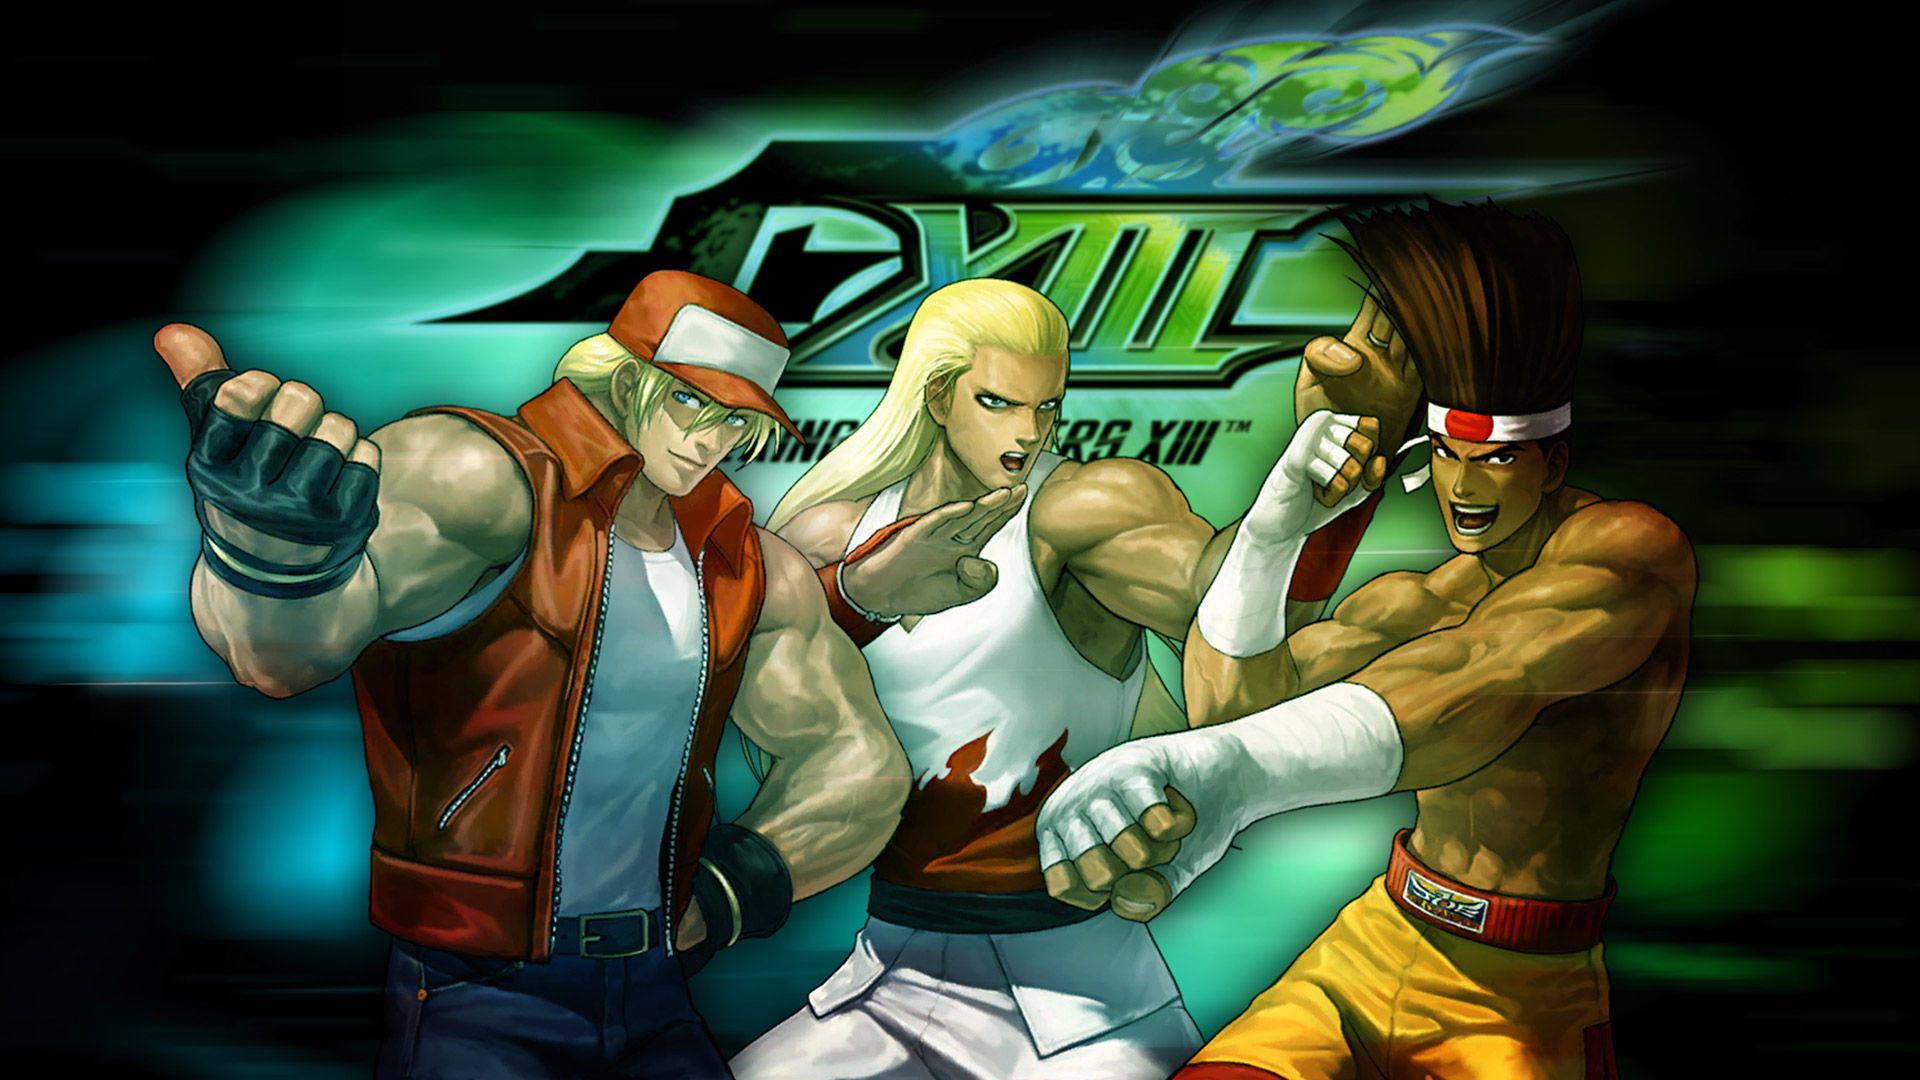 The King of Fighters XIII Wallpaper. Boozefighters MC Wallpaper, Galactic Warfighters Wallpaper and Foo Fighters Wallpaper